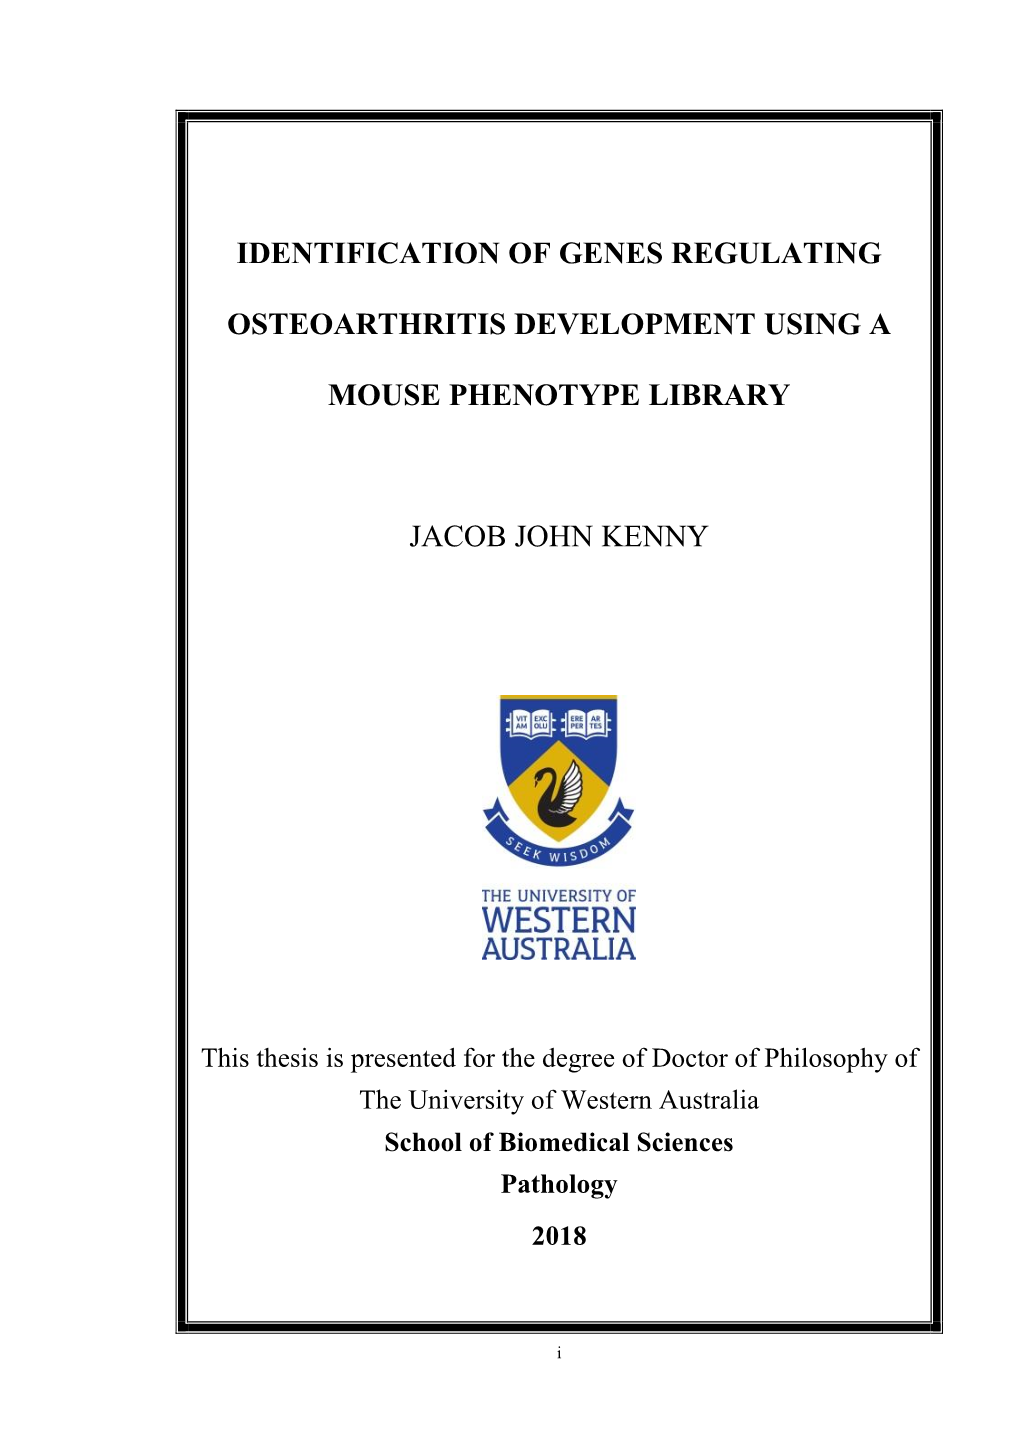 Thesis Is Presented for the Degree of Doctor of Philosophy of the University of Western Australia School of Biomedical Sciences Pathology 2018